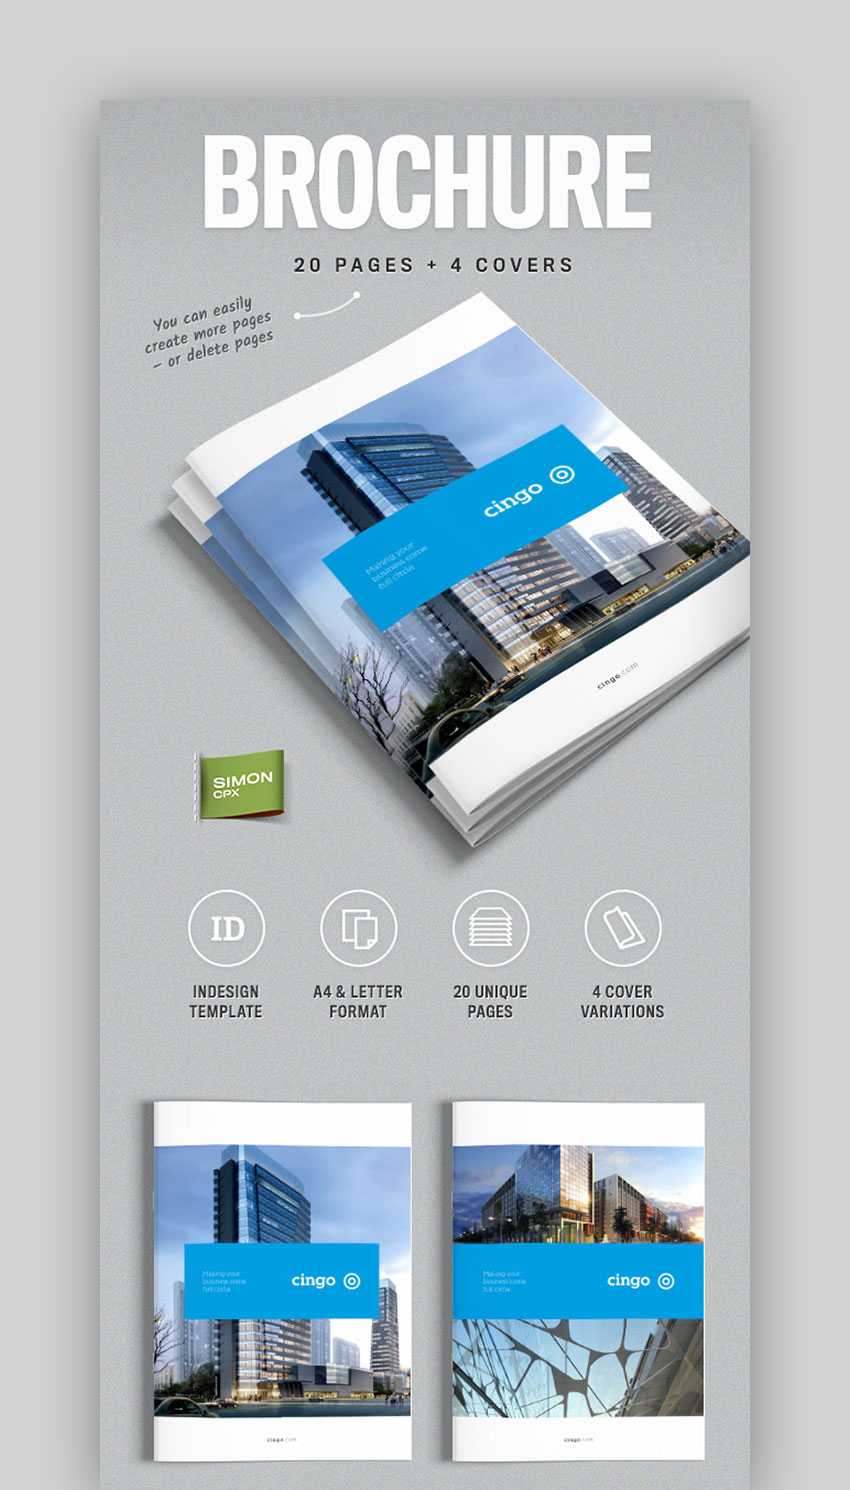 30 Best Indesign Brochure Templates – Creative Business With Regard To Good Brochure Templates